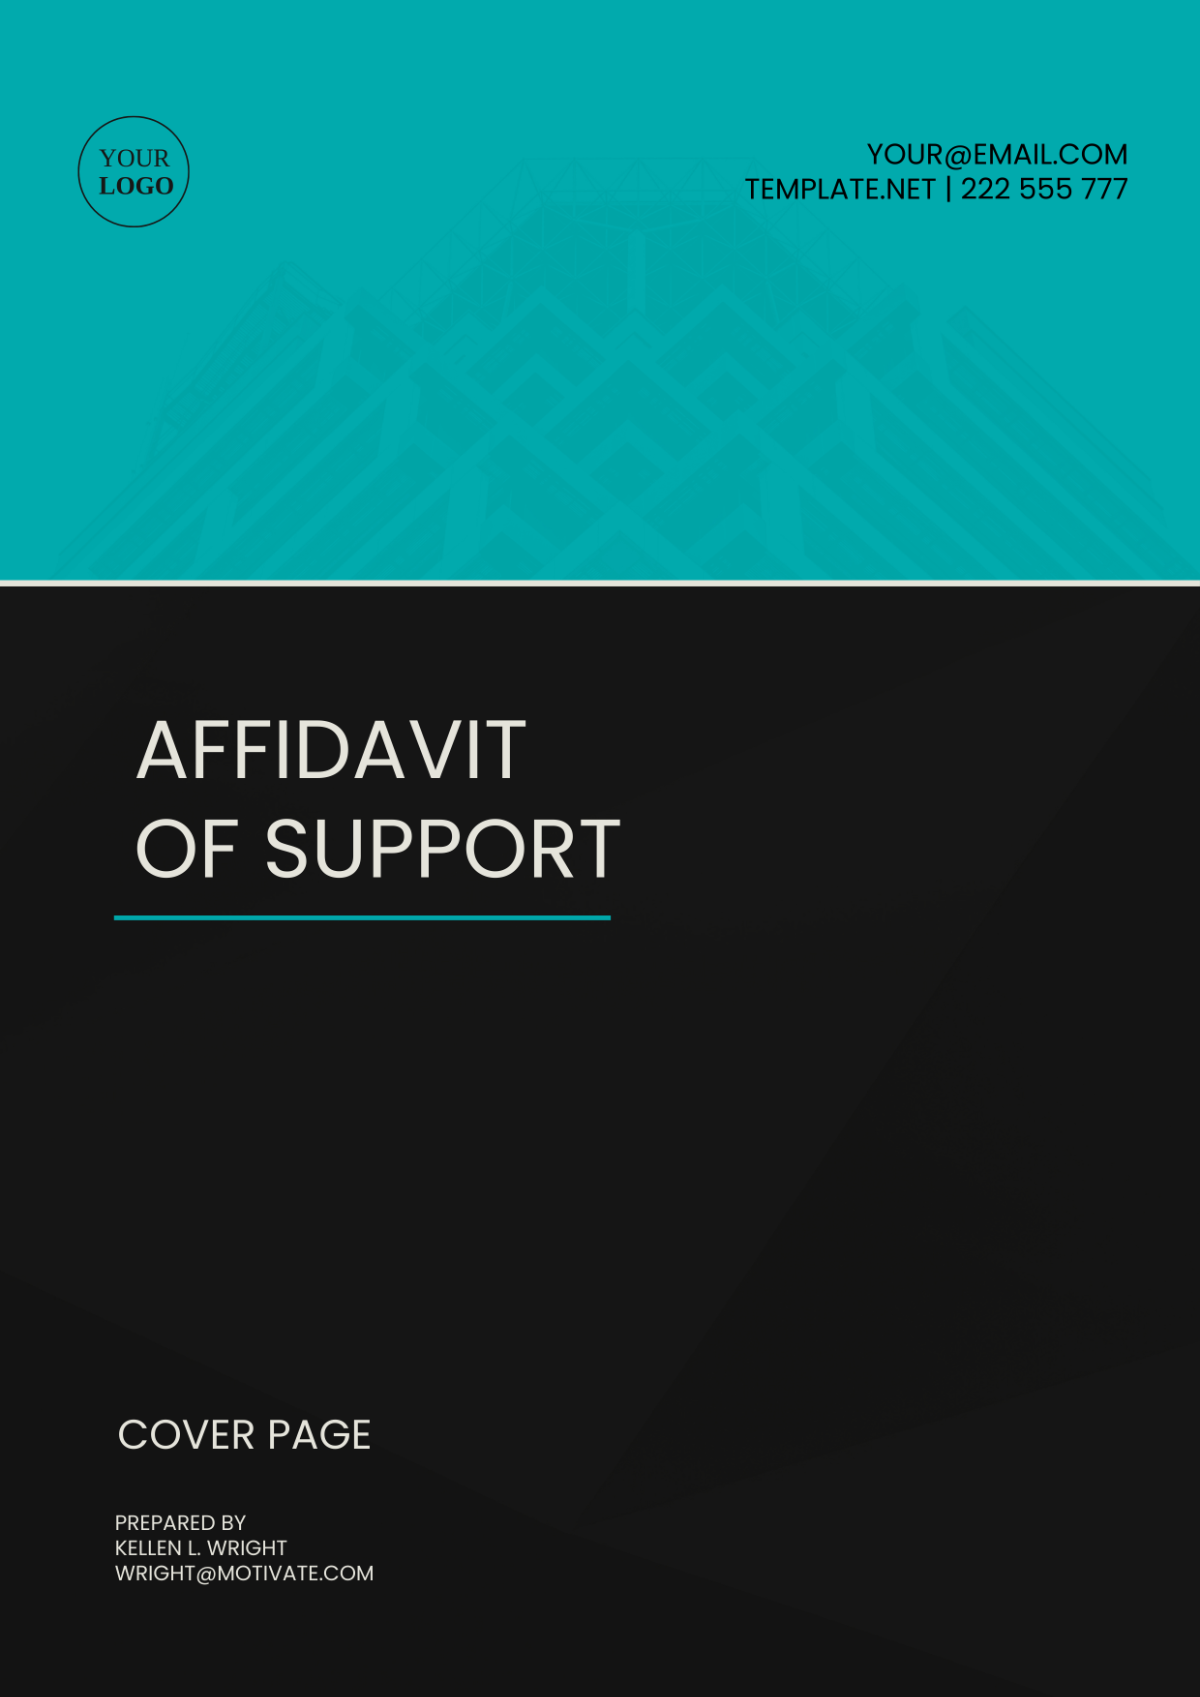 Affidavit of Support Cover Page